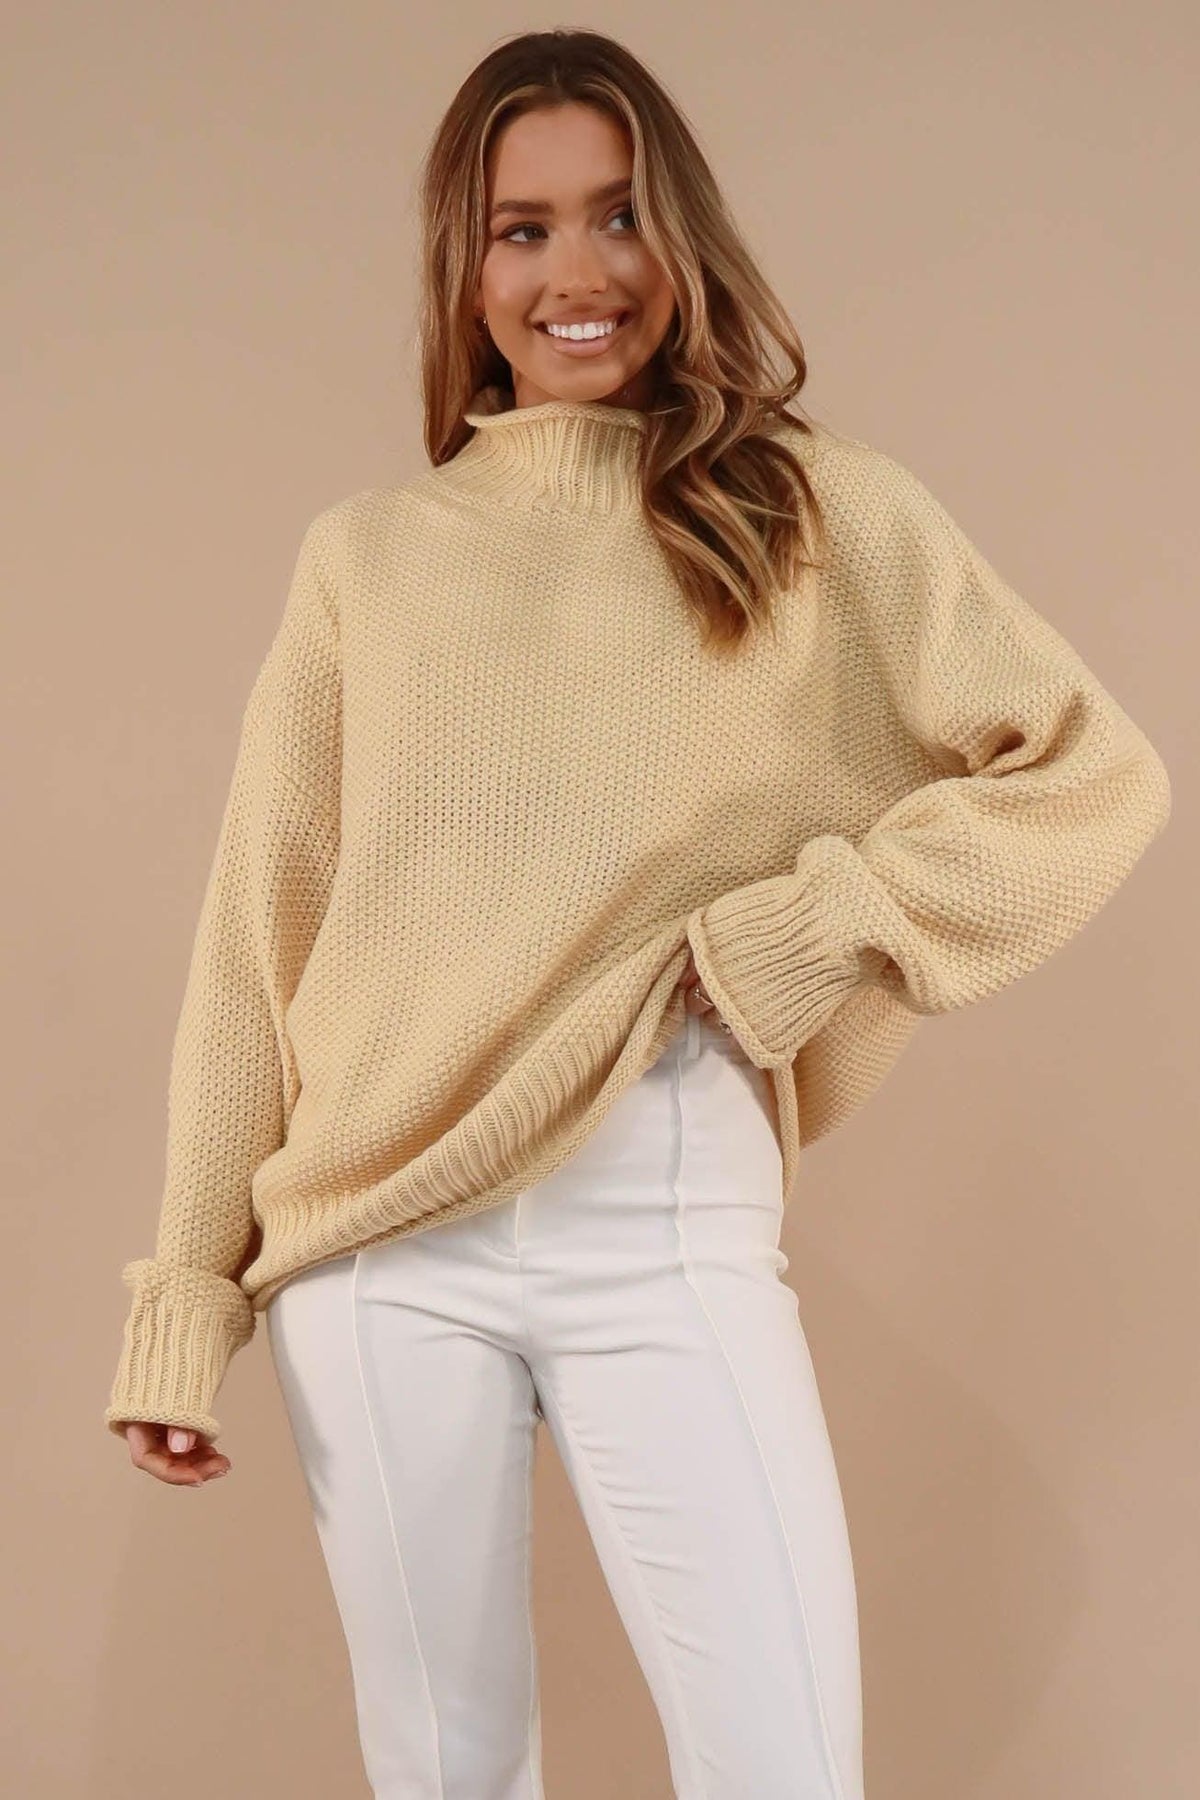 Sunnie Top, BEIGE, COTTON, KNIT, KNITS, LONG SLEEVE, POLYESTER, TOP, TOPS, , -MISHKAH